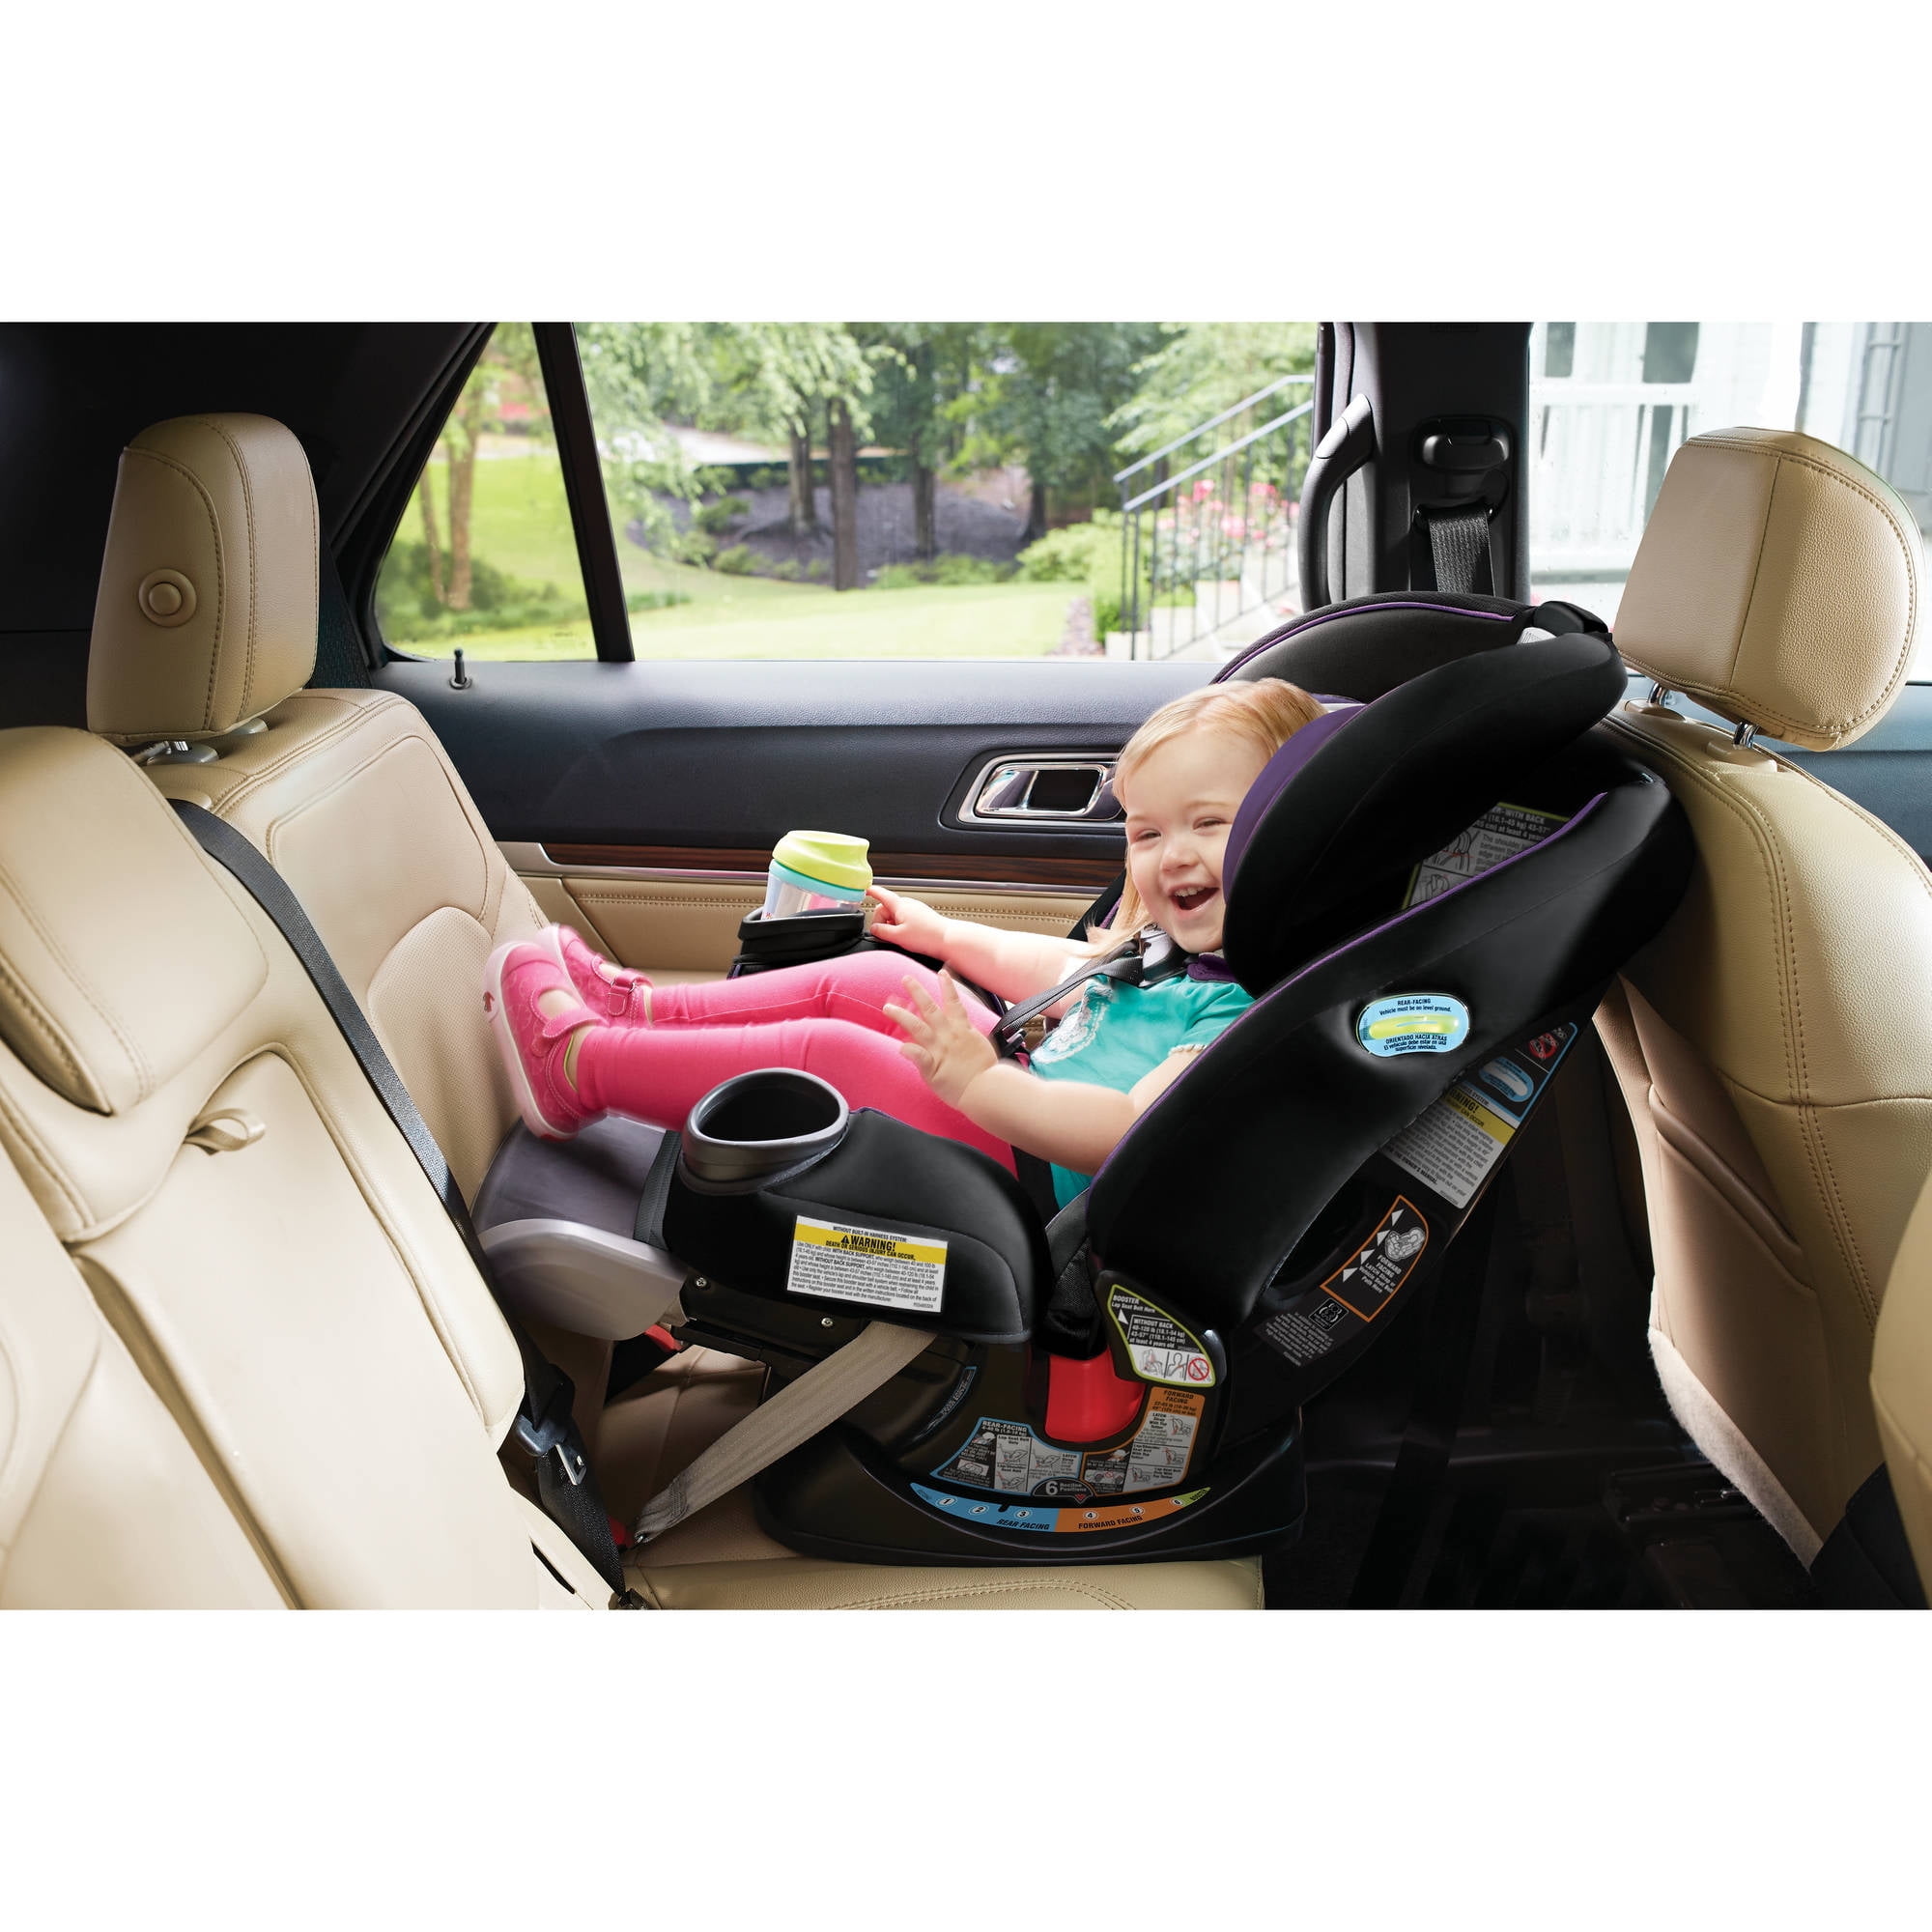 graco 4ever car seat extend2fit